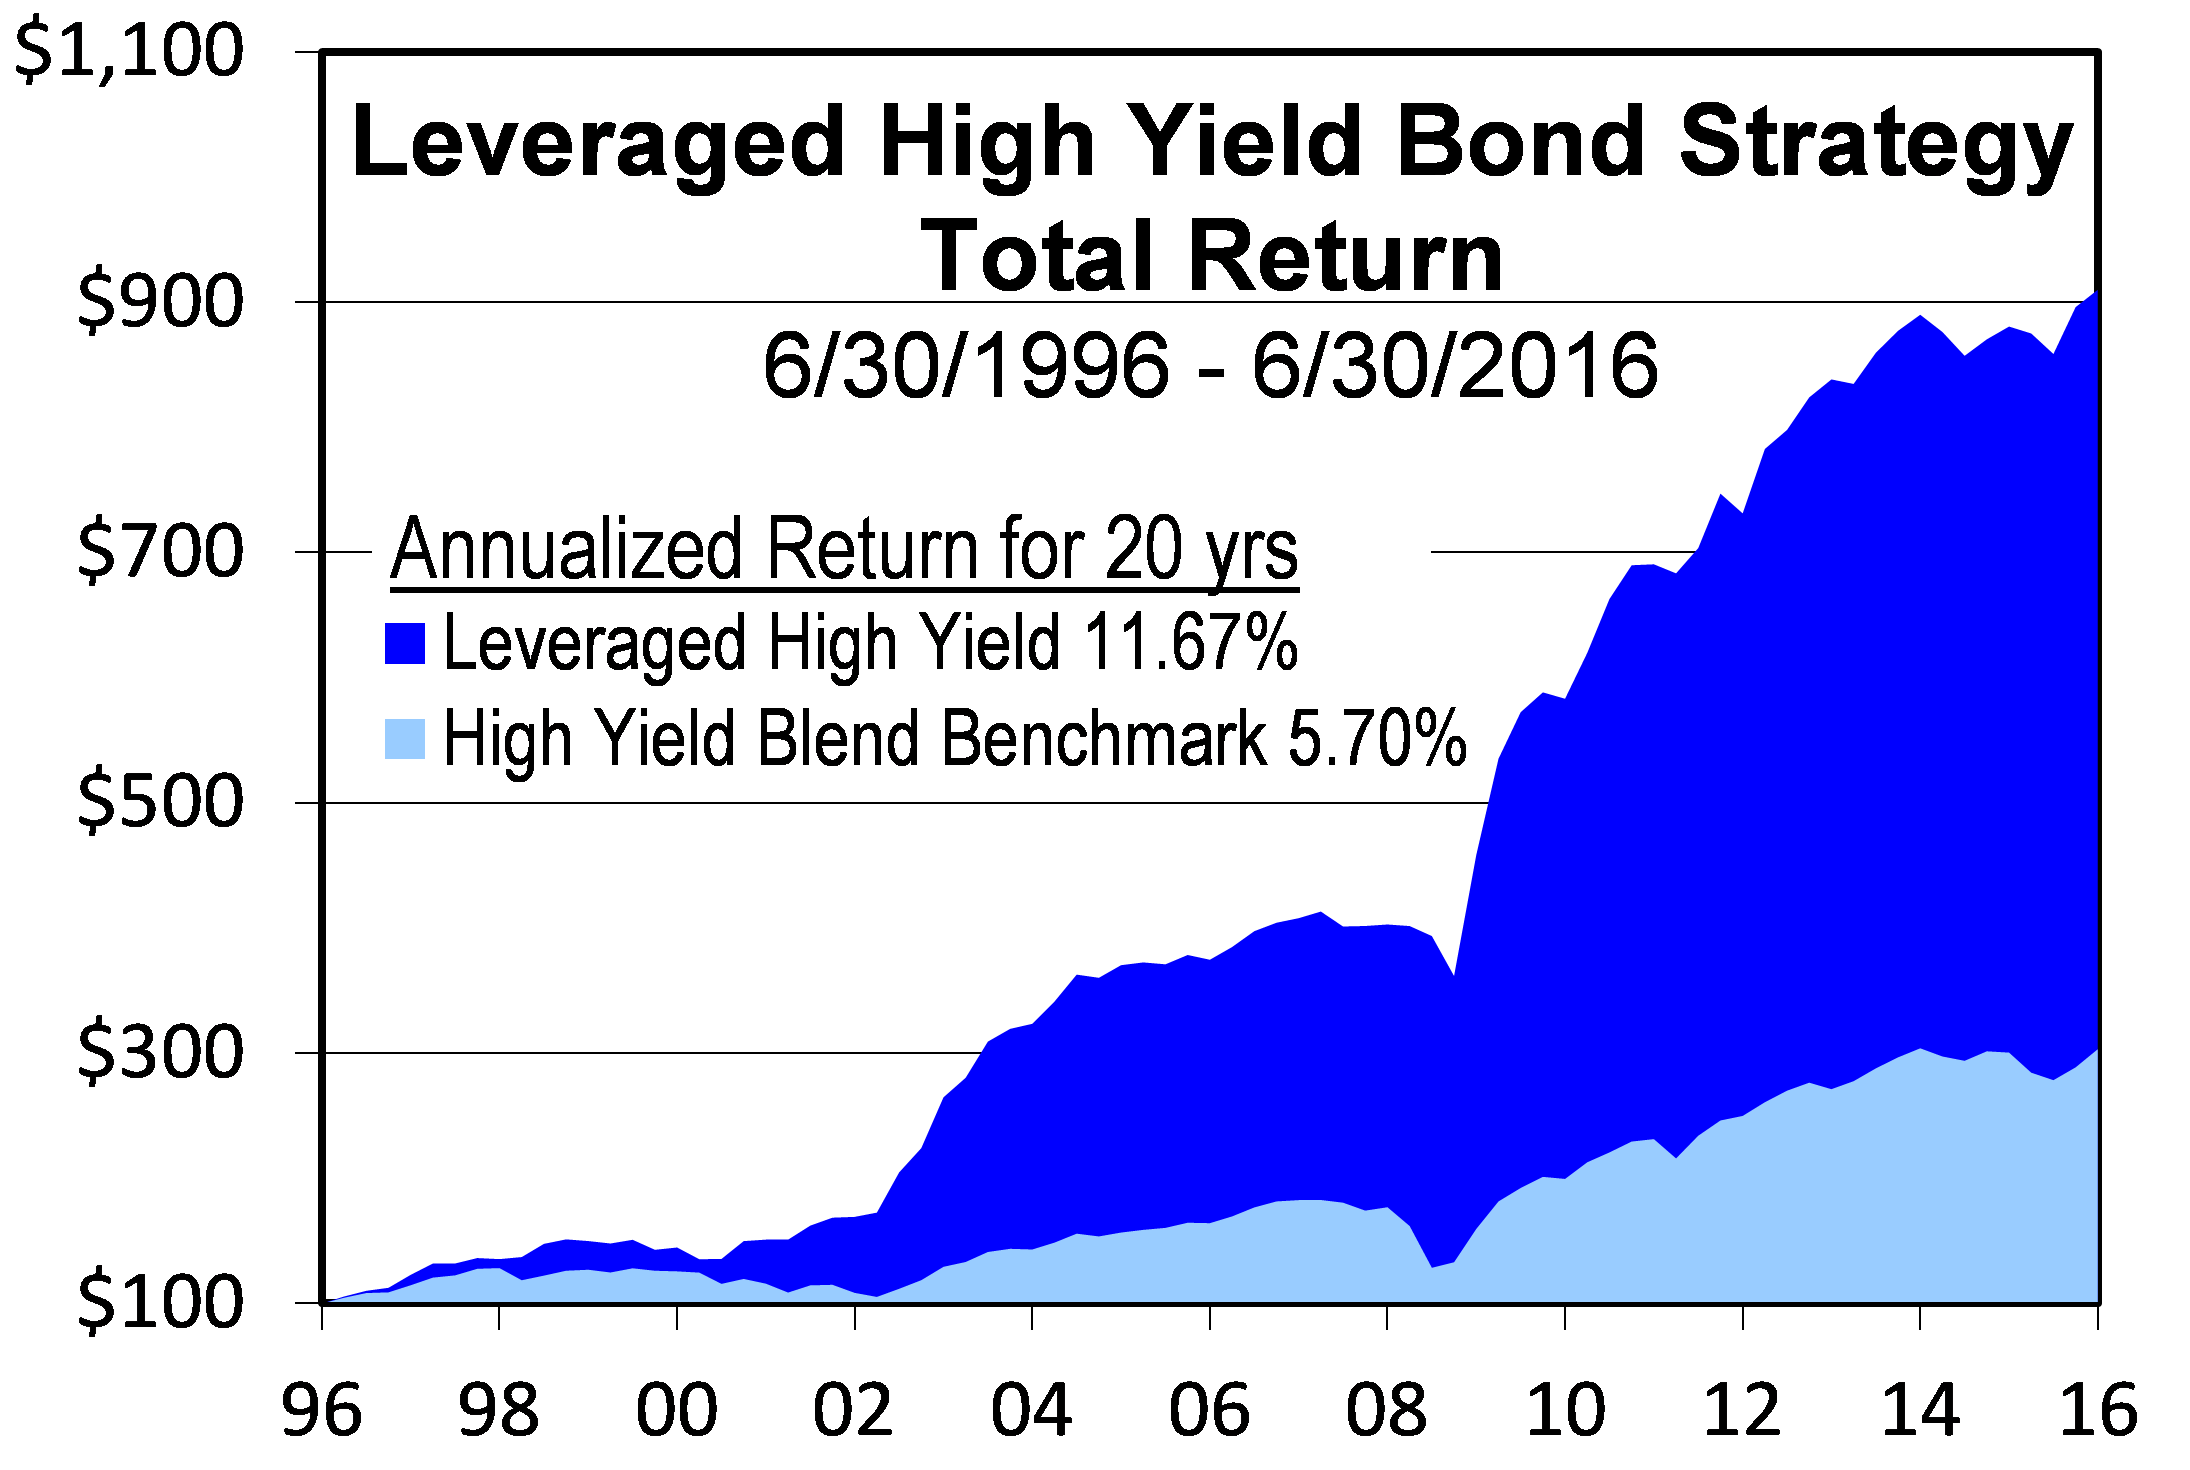 Leveraged High Yield